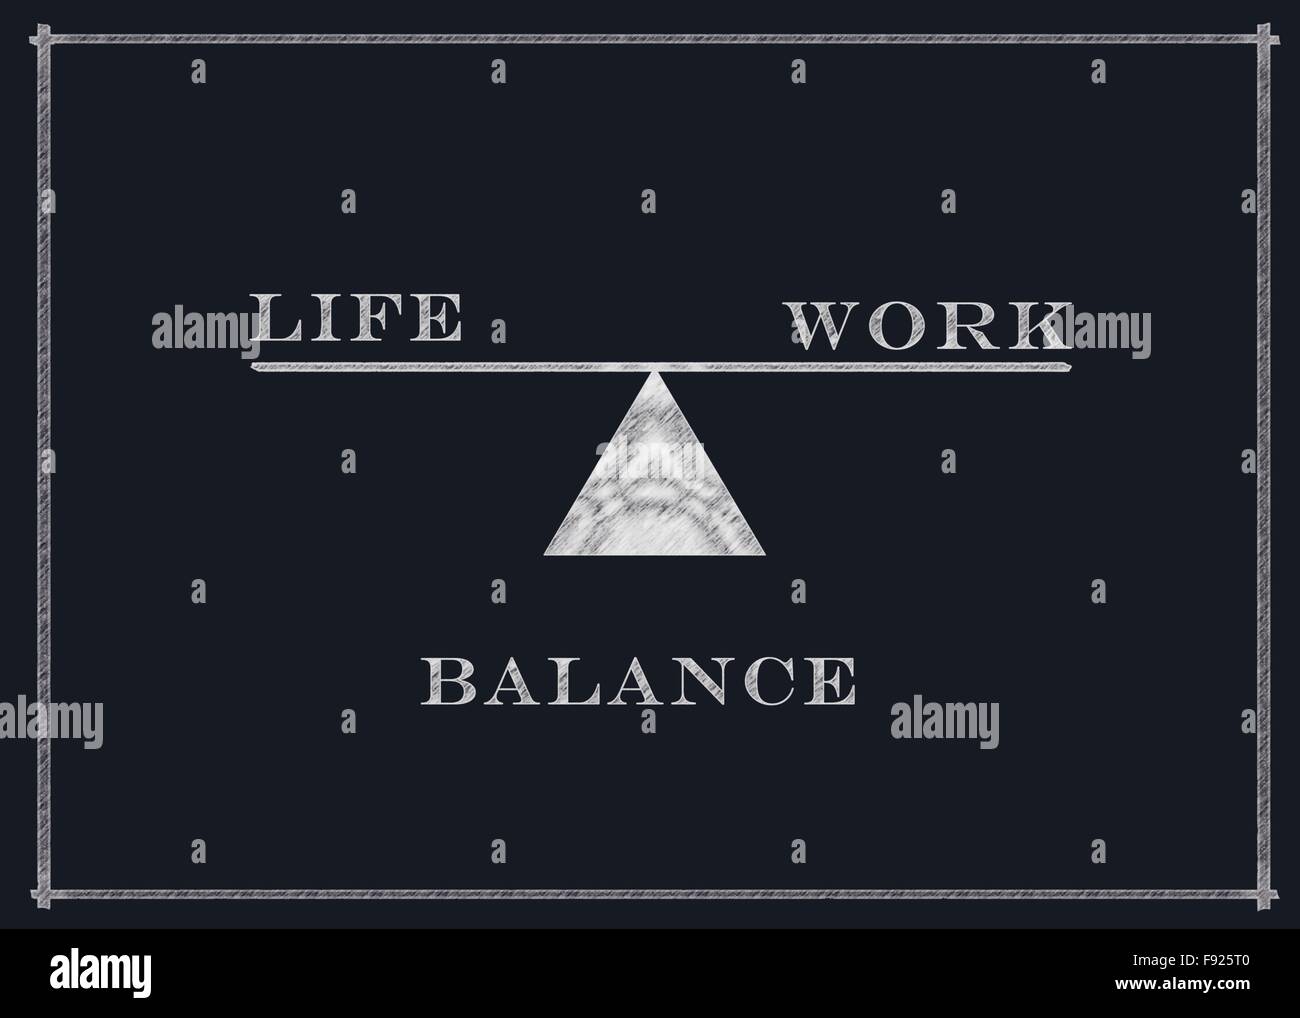 Work and life balance concept on a blackboard Stock Photo